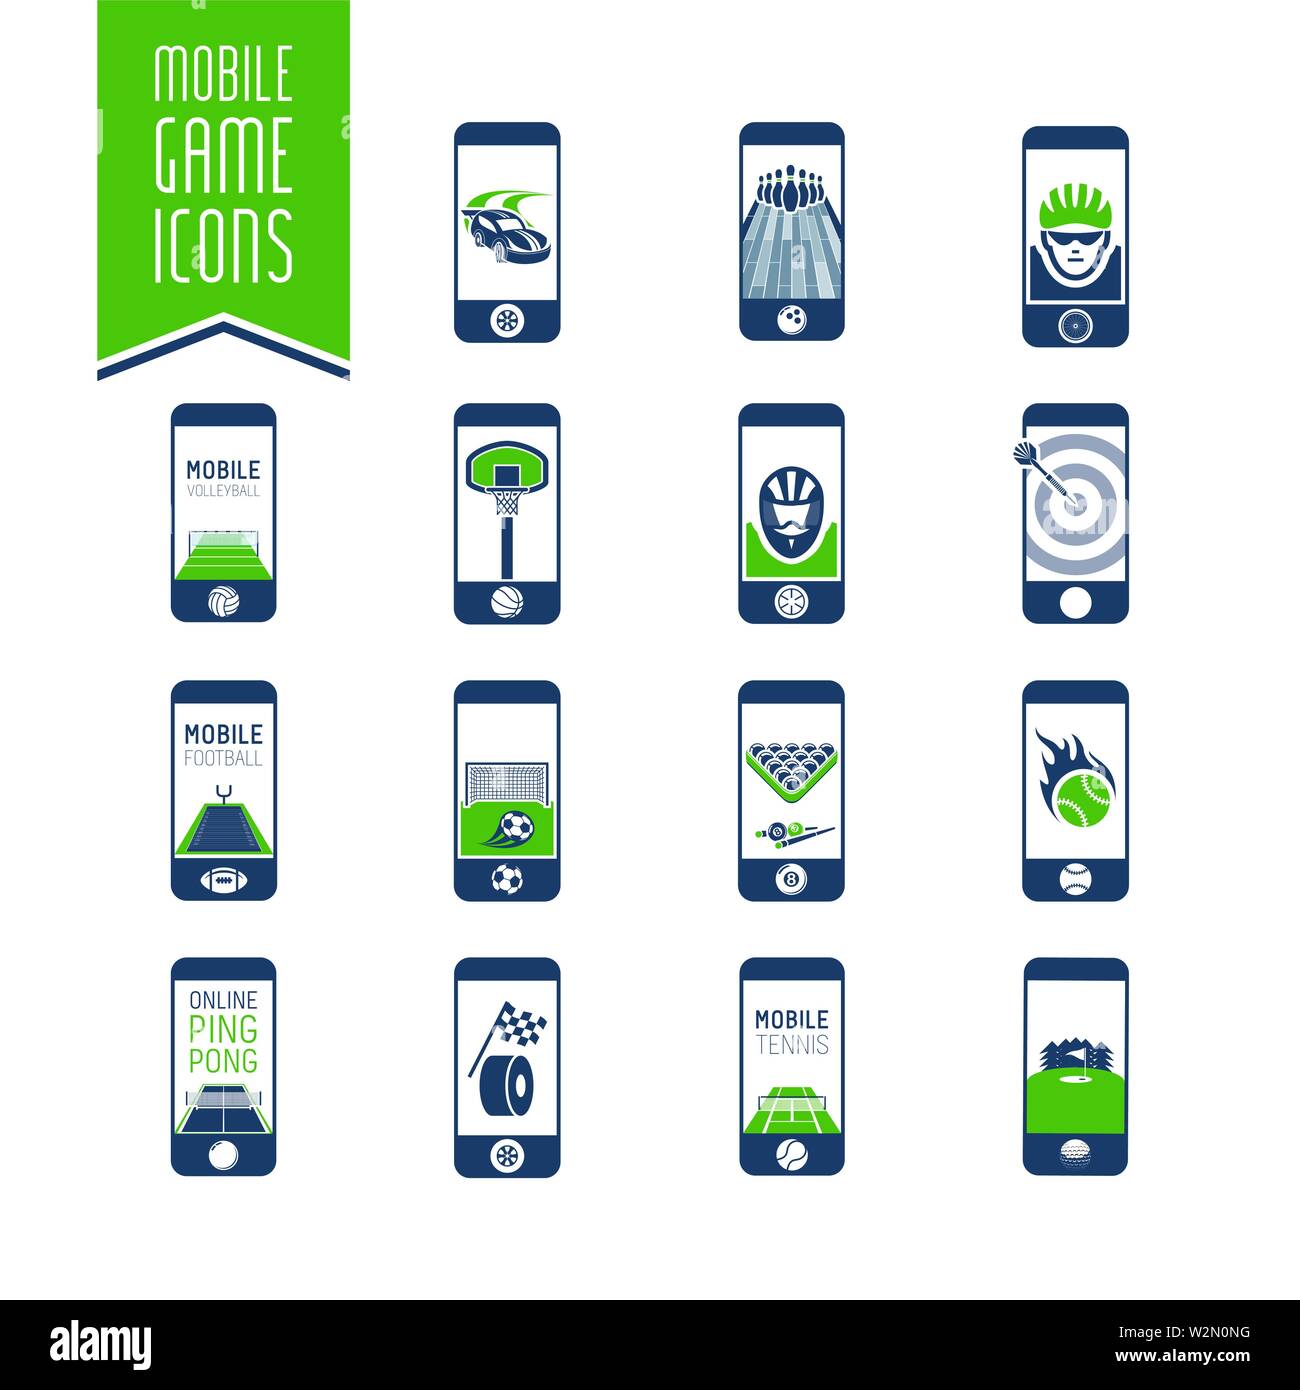 Mobile - online sport games icon set Stock Vector